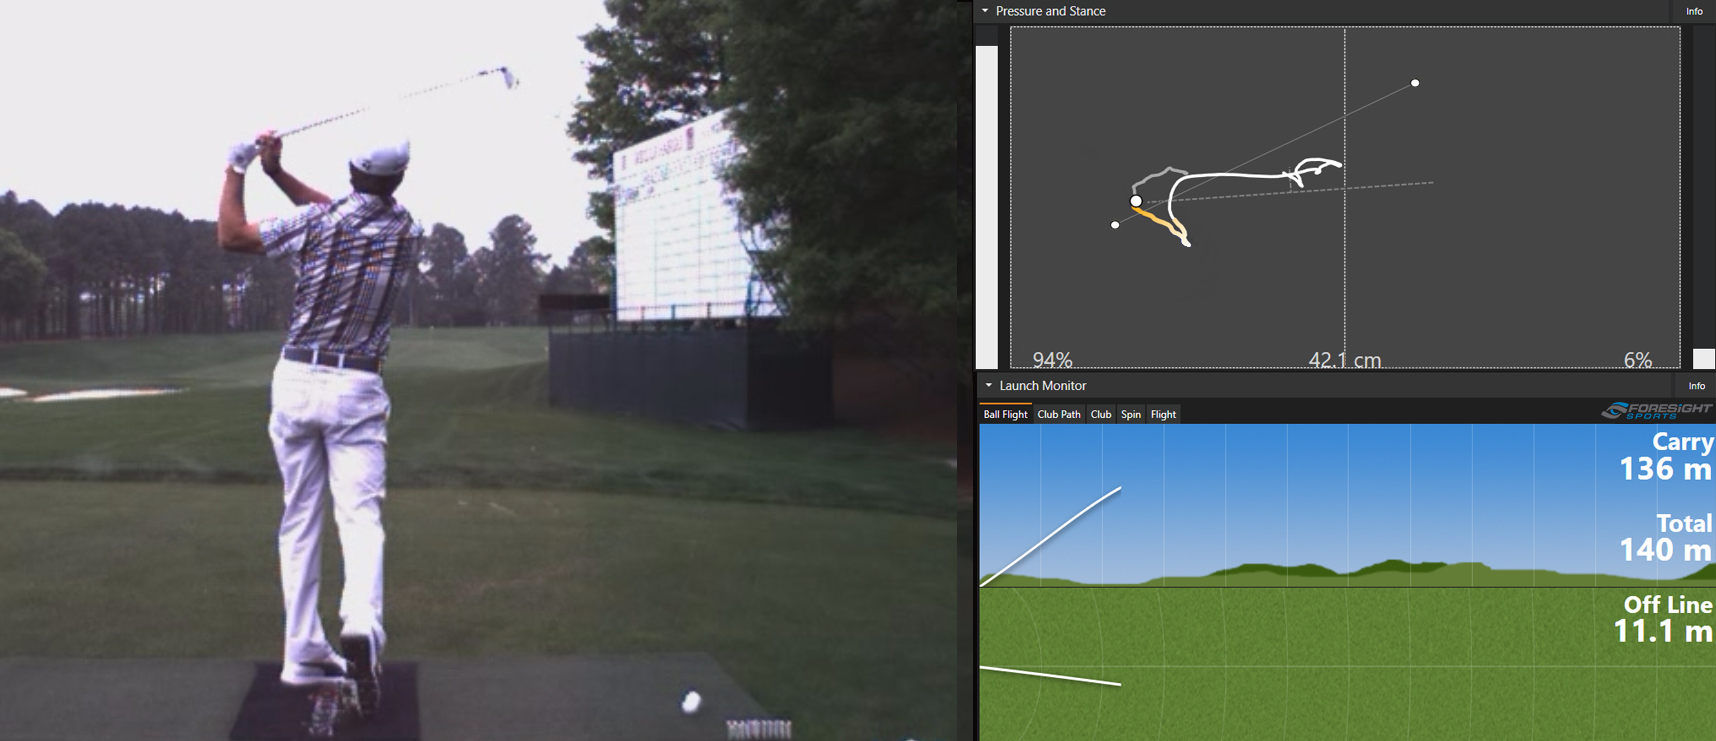 Ball/club tracking data is synced with the 3D Motion Plate